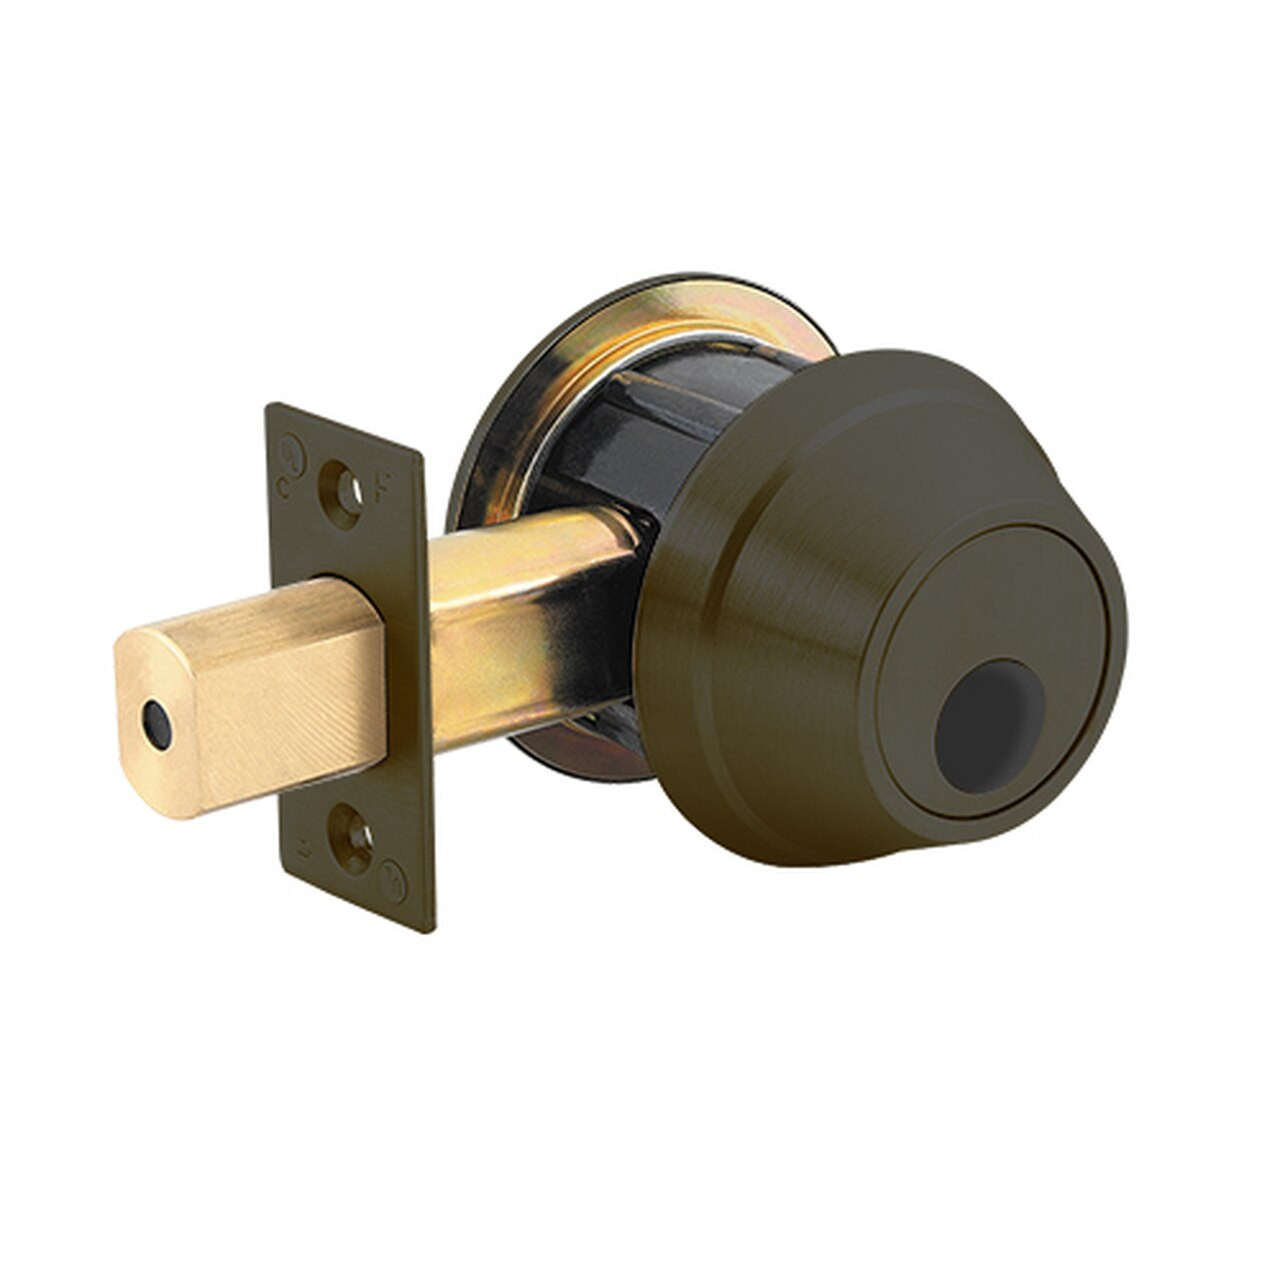 QDB282-613-R8-NOS-SC Stanley QDB200 Series Double Cylinder Standard Duty Auxiliary Deadbolt Lock in Oil Rubbed Bronze Finish